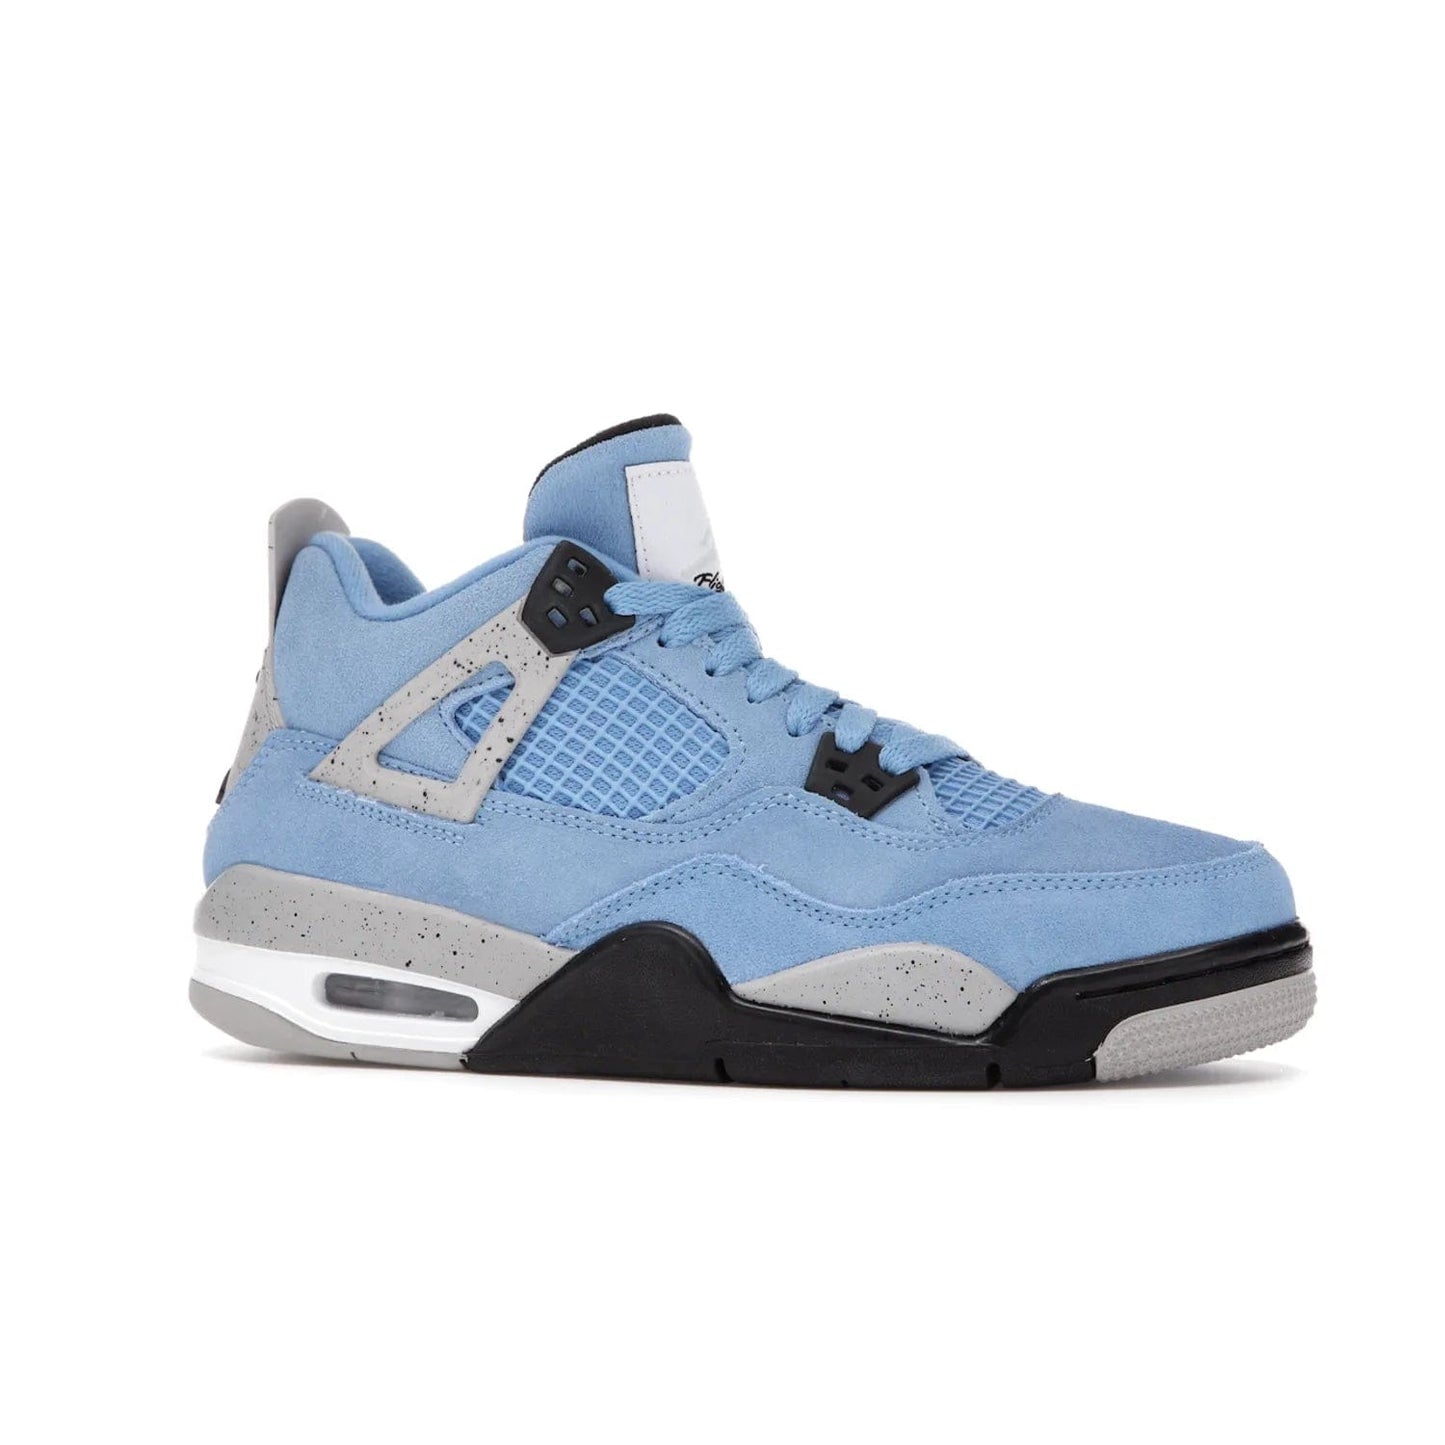 Jordan 4 Retro University Blue (GS) - Image 3 - Only at www.BallersClubKickz.com - Air Jordan 4 Retro University Blue GS: Classic silhouette and vibrant colors. Featuring a suede upper and Jumpman icon, this grade school-size shoe is perfect for collections and retails at $150.